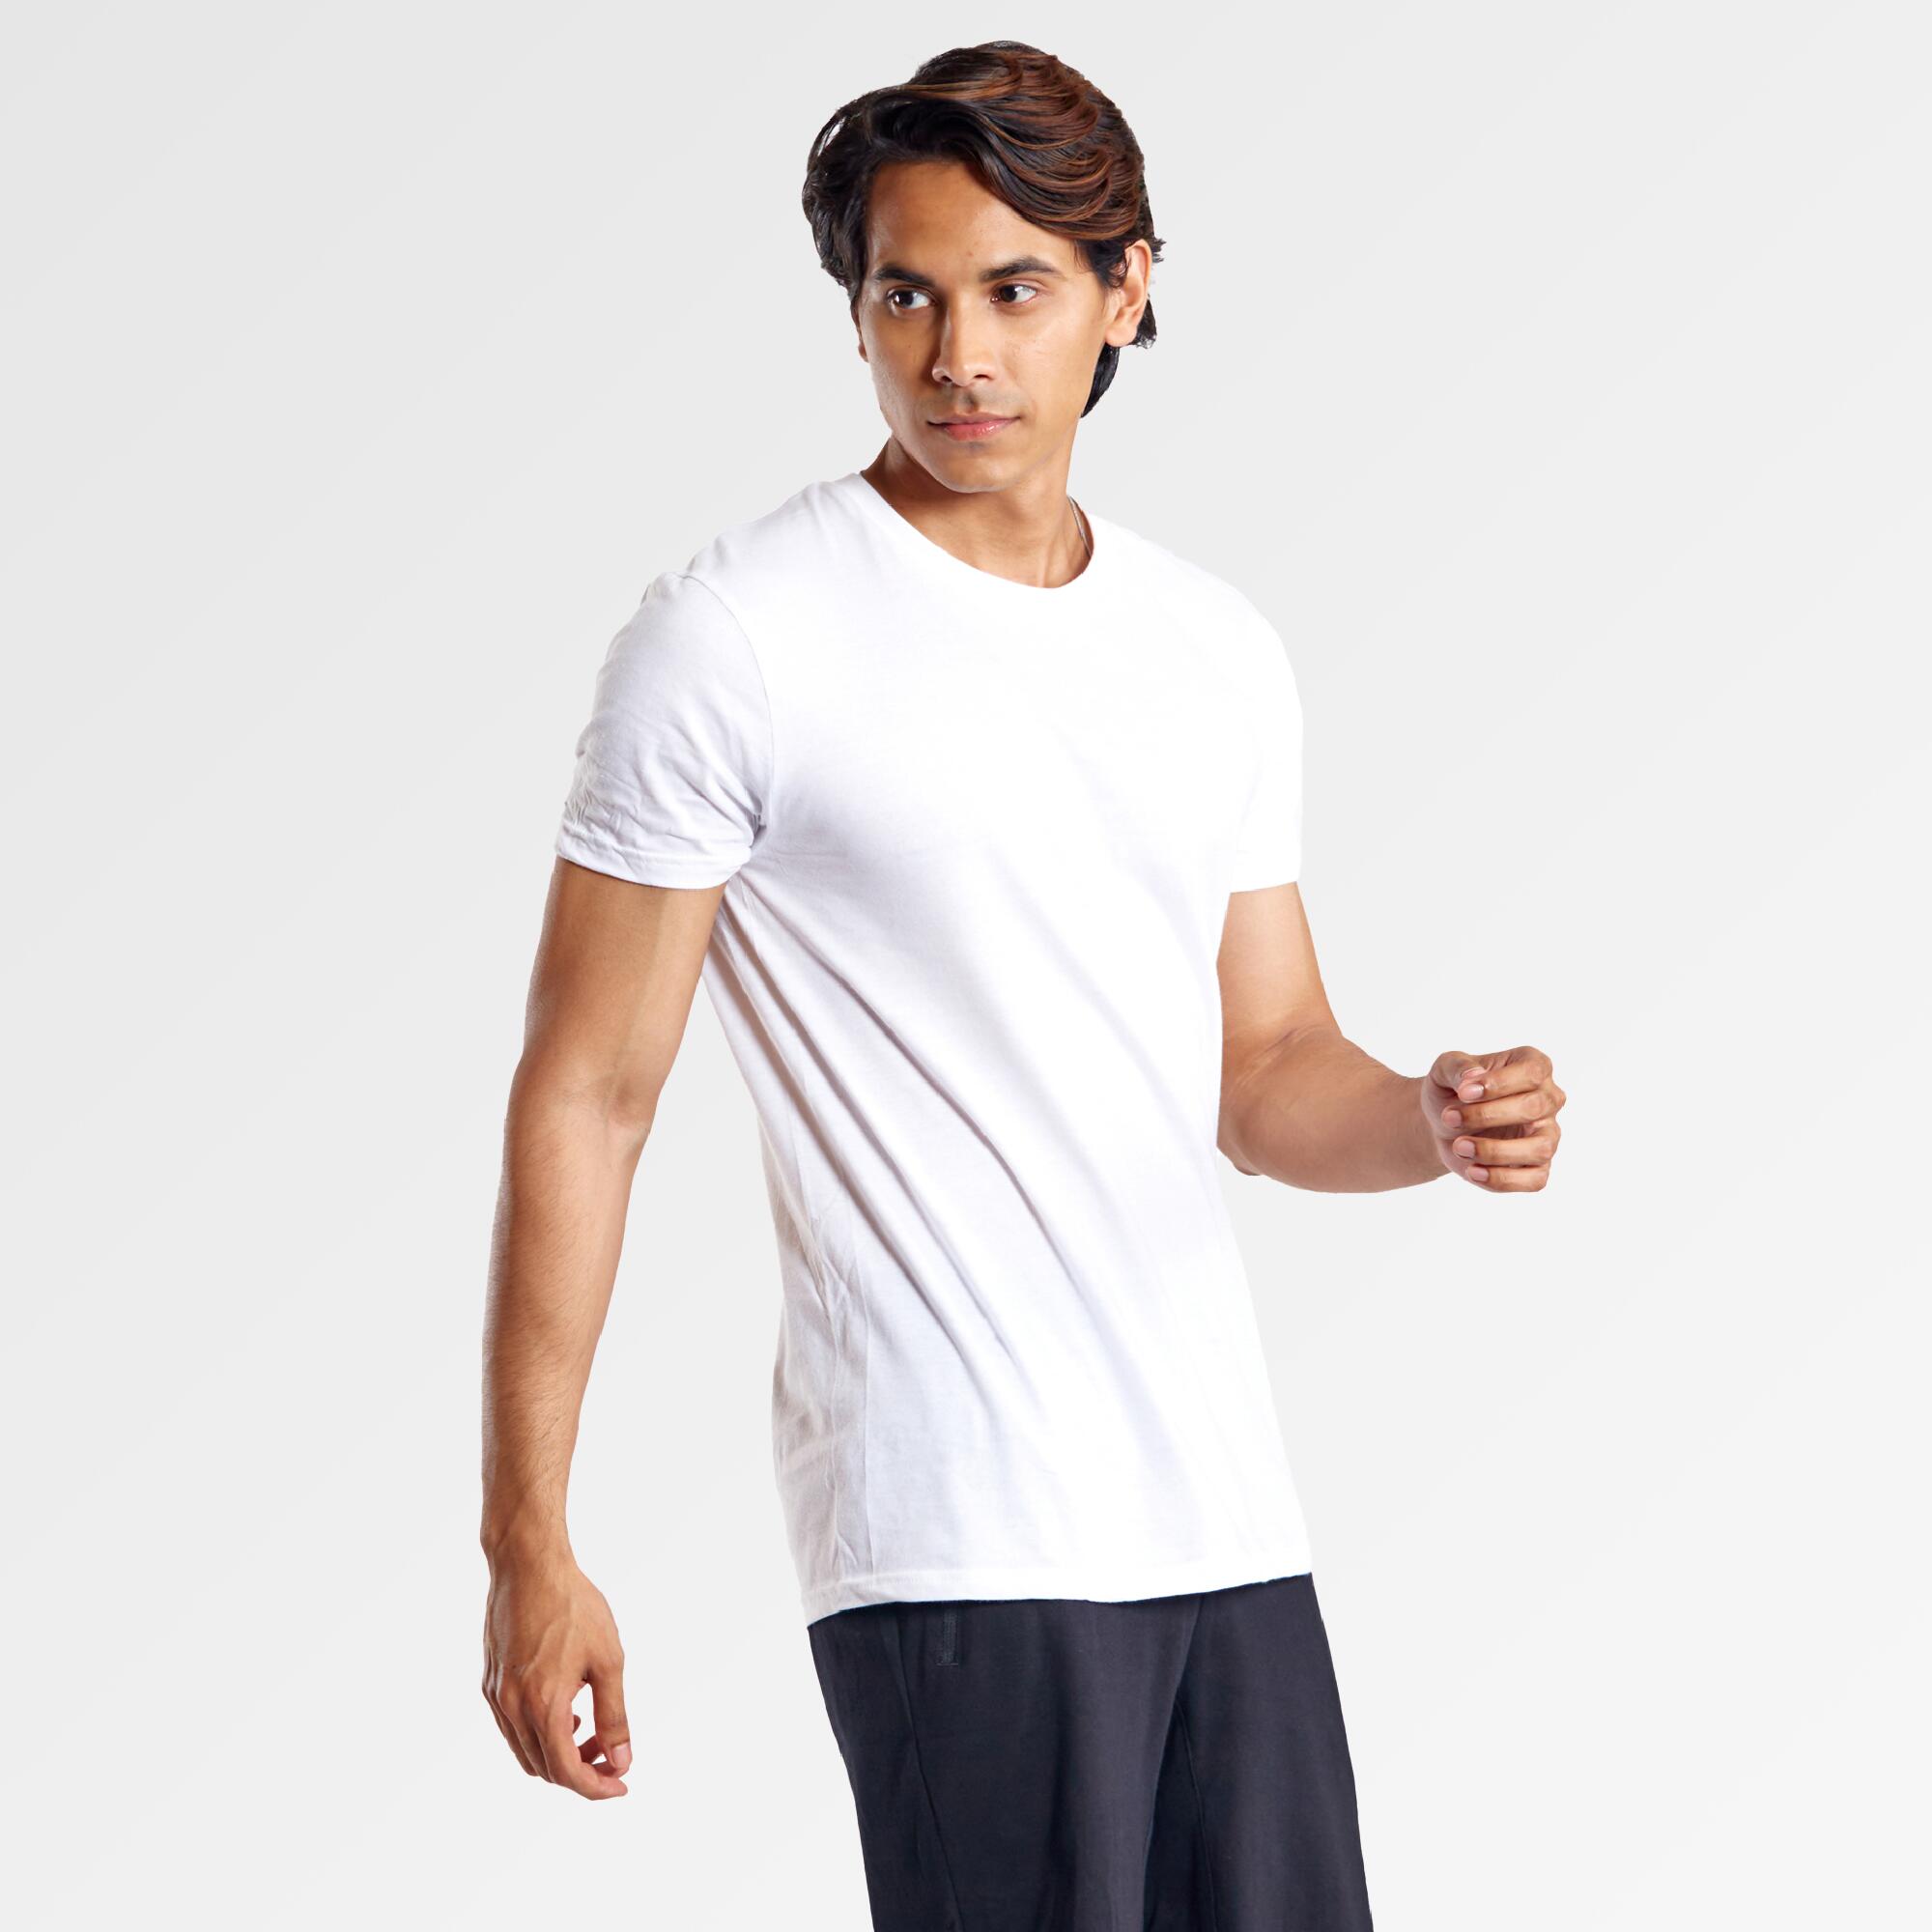 Statement Pieces Cool T-Shirts That Define Your Style